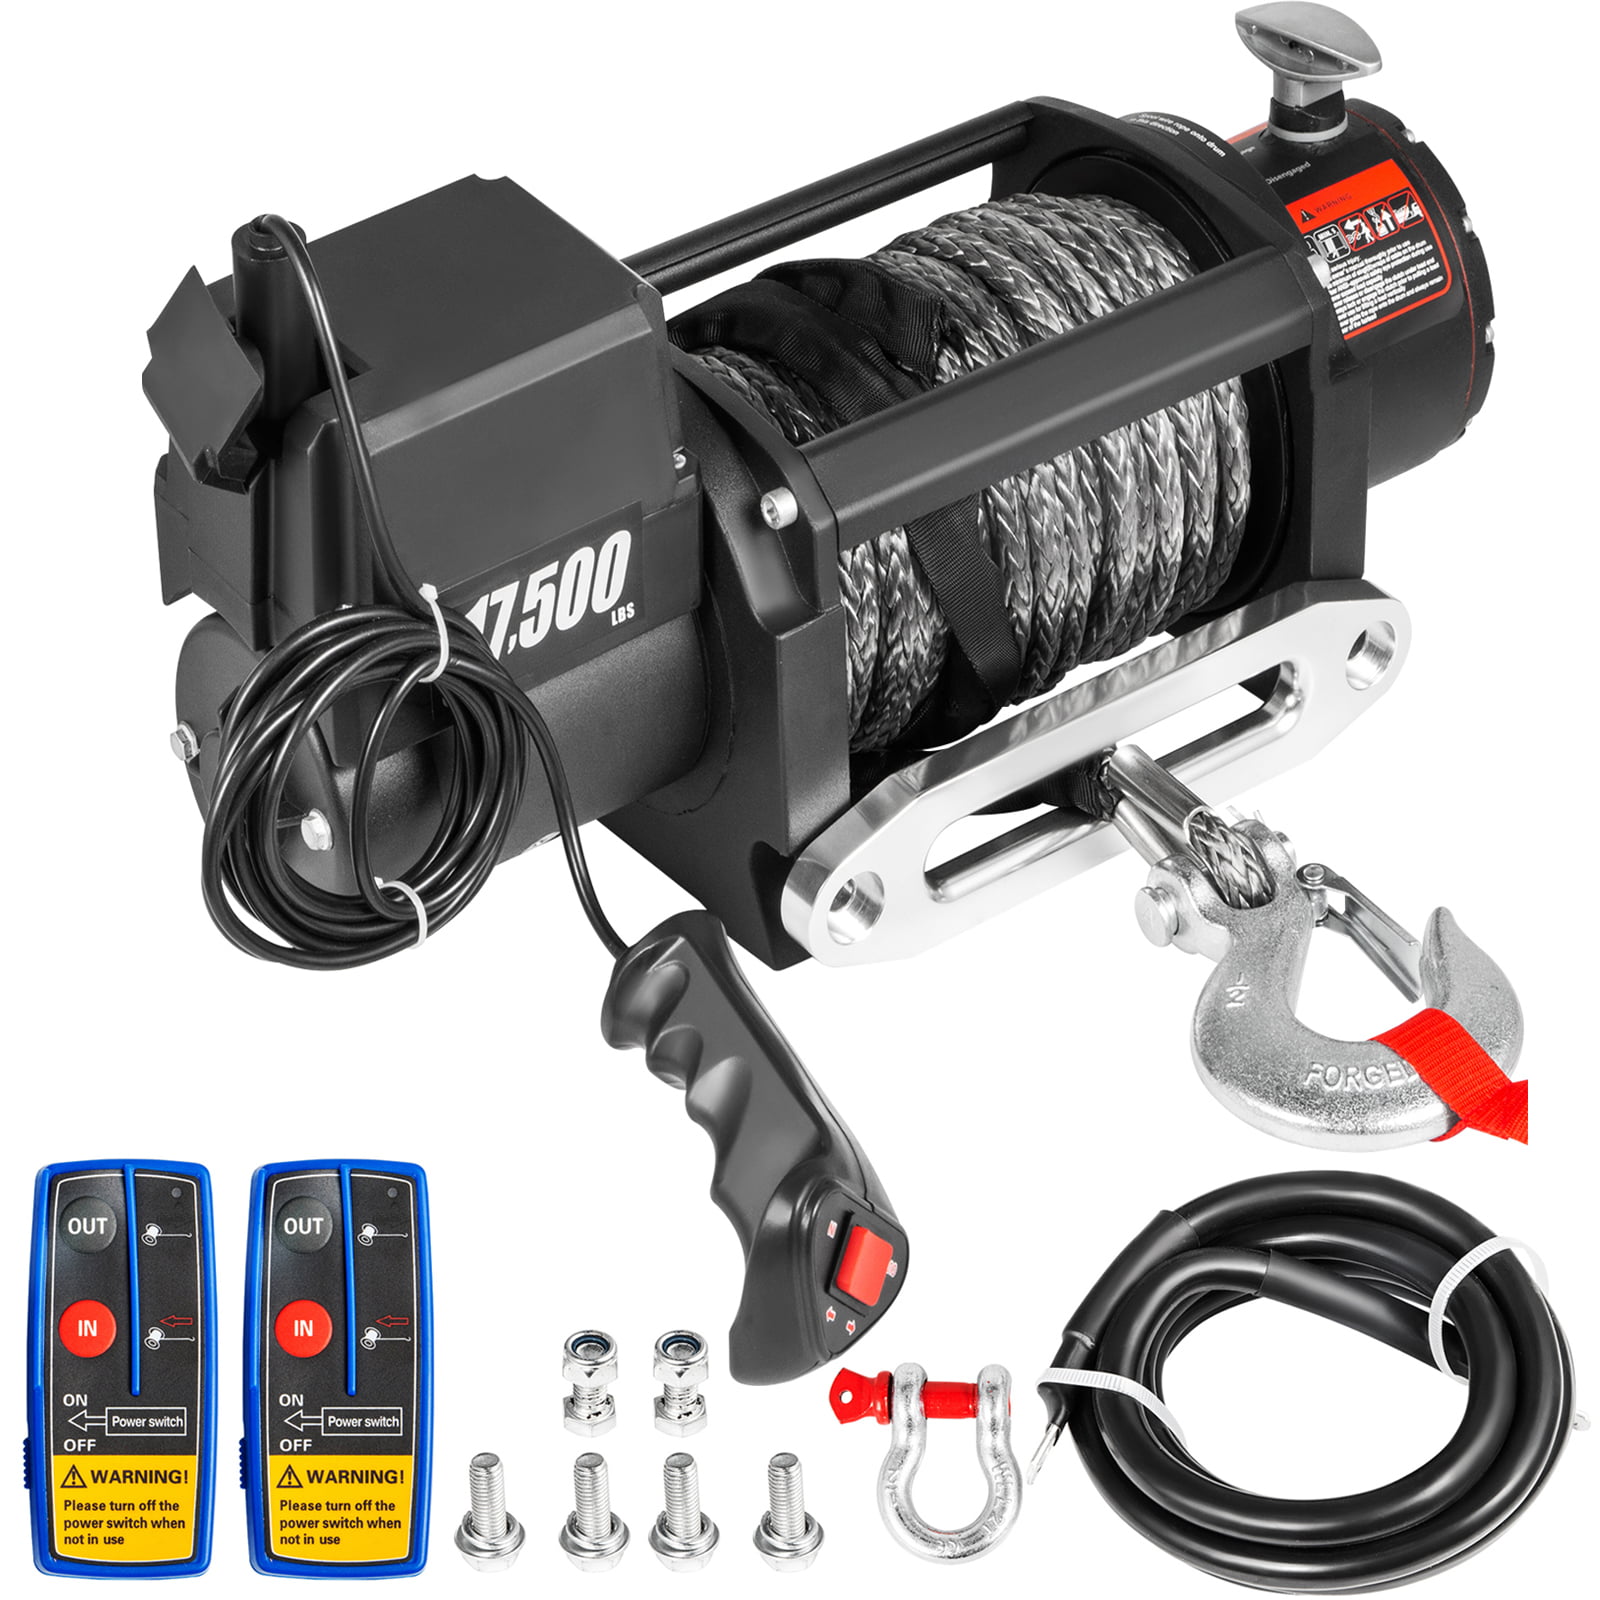 VEVOR Truck Winch 17500Ibs Electric Winch 98.5ft Synthetic Rope 12V 6.6hp Power Winch Jeep Winch with Wireless Remote Control and Powerful Motor for UTV ATV & Jeep Truck and Wrangler Accessories 